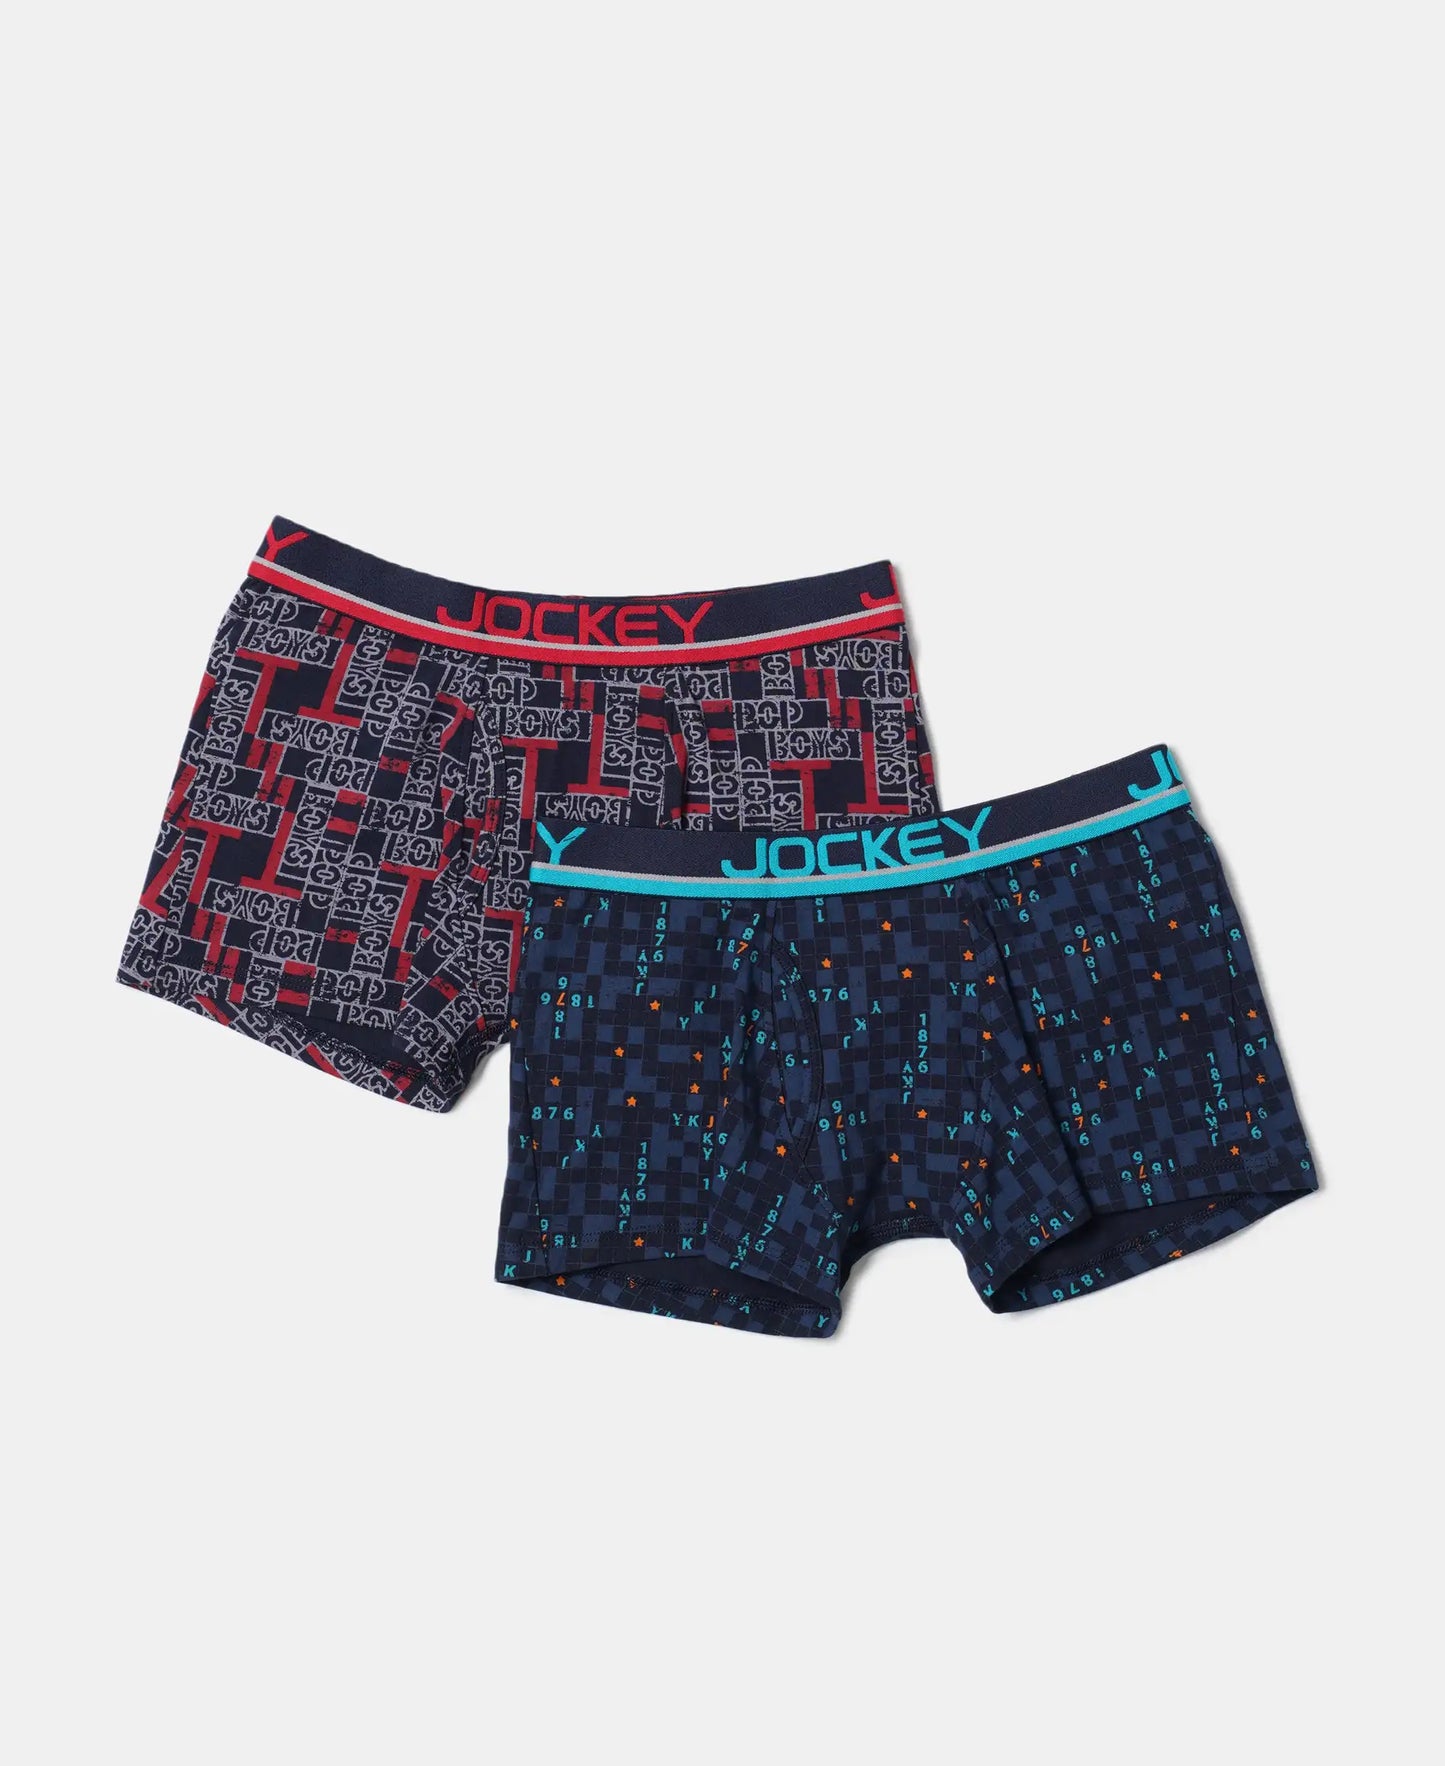 Super Combed Cotton Elastane Printed Trunk with Ultrasoft Waistband - Assorted Prints-1